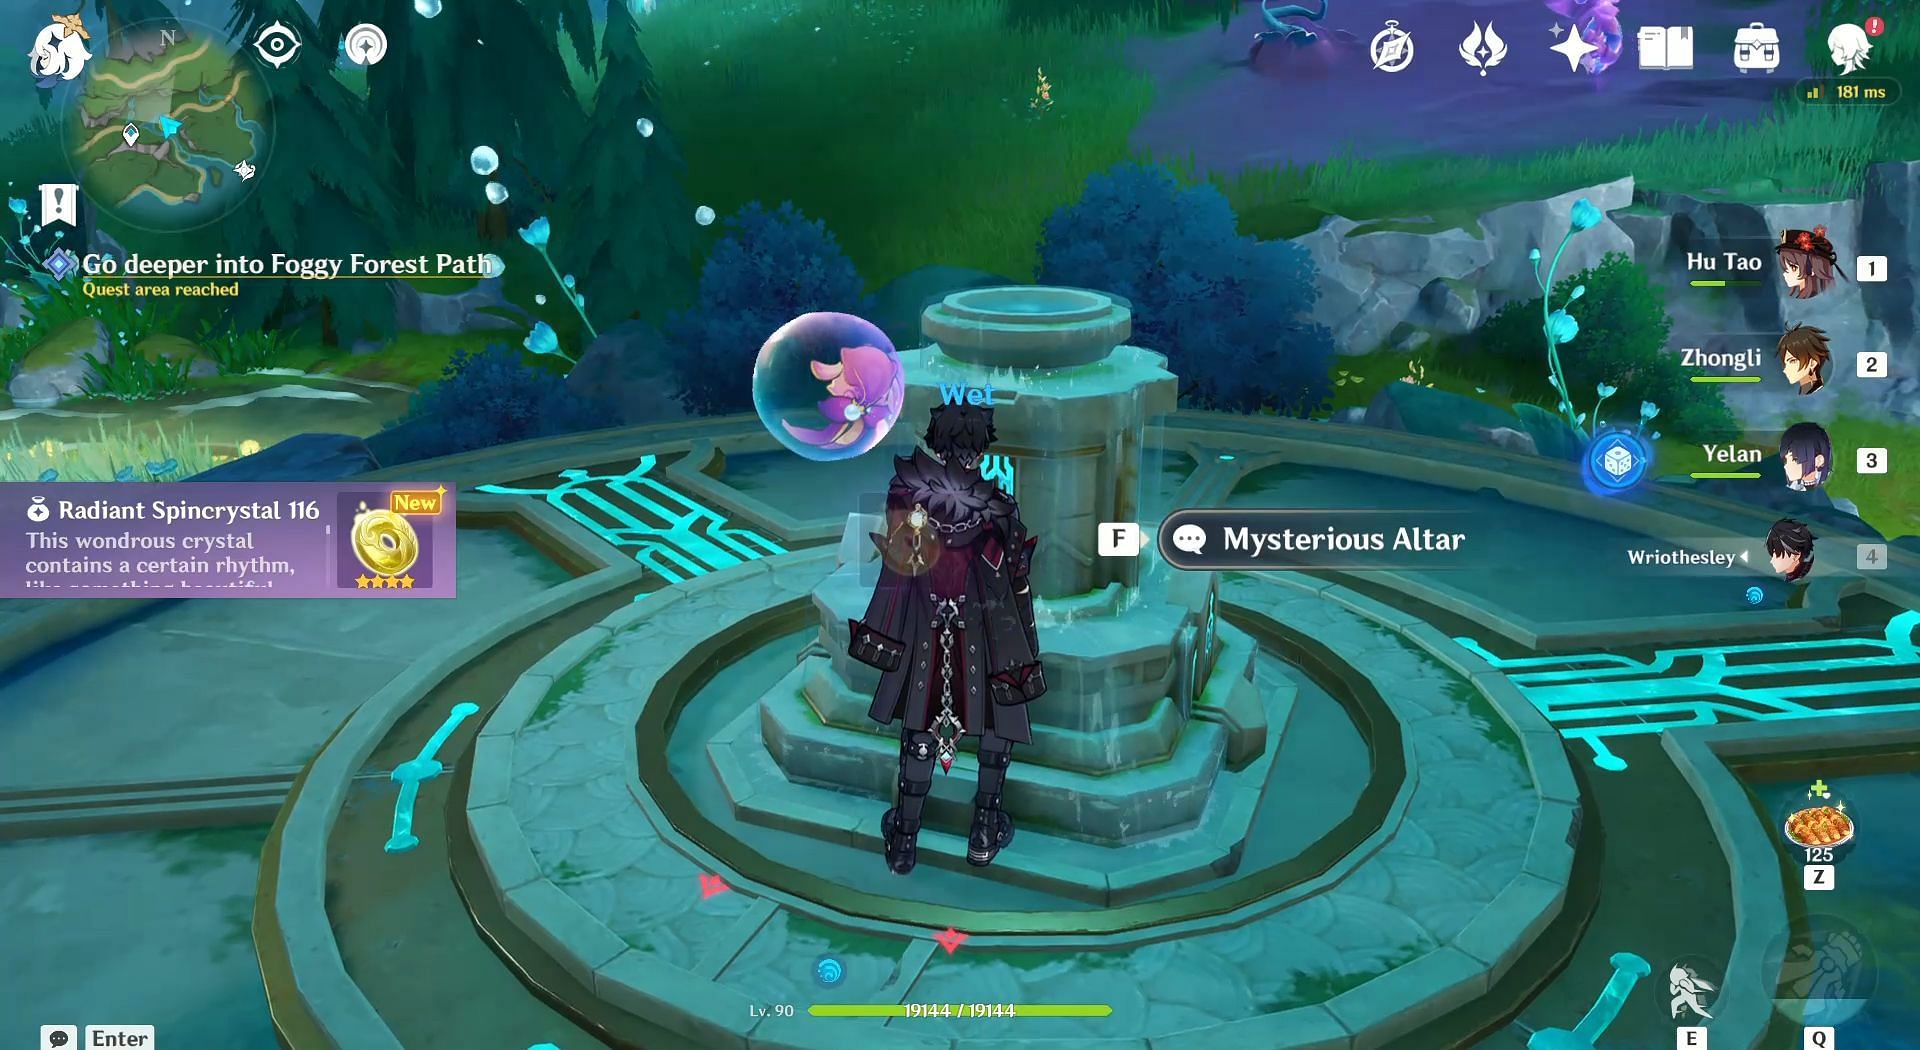 Interact with the altar (Image via HoYoverse)